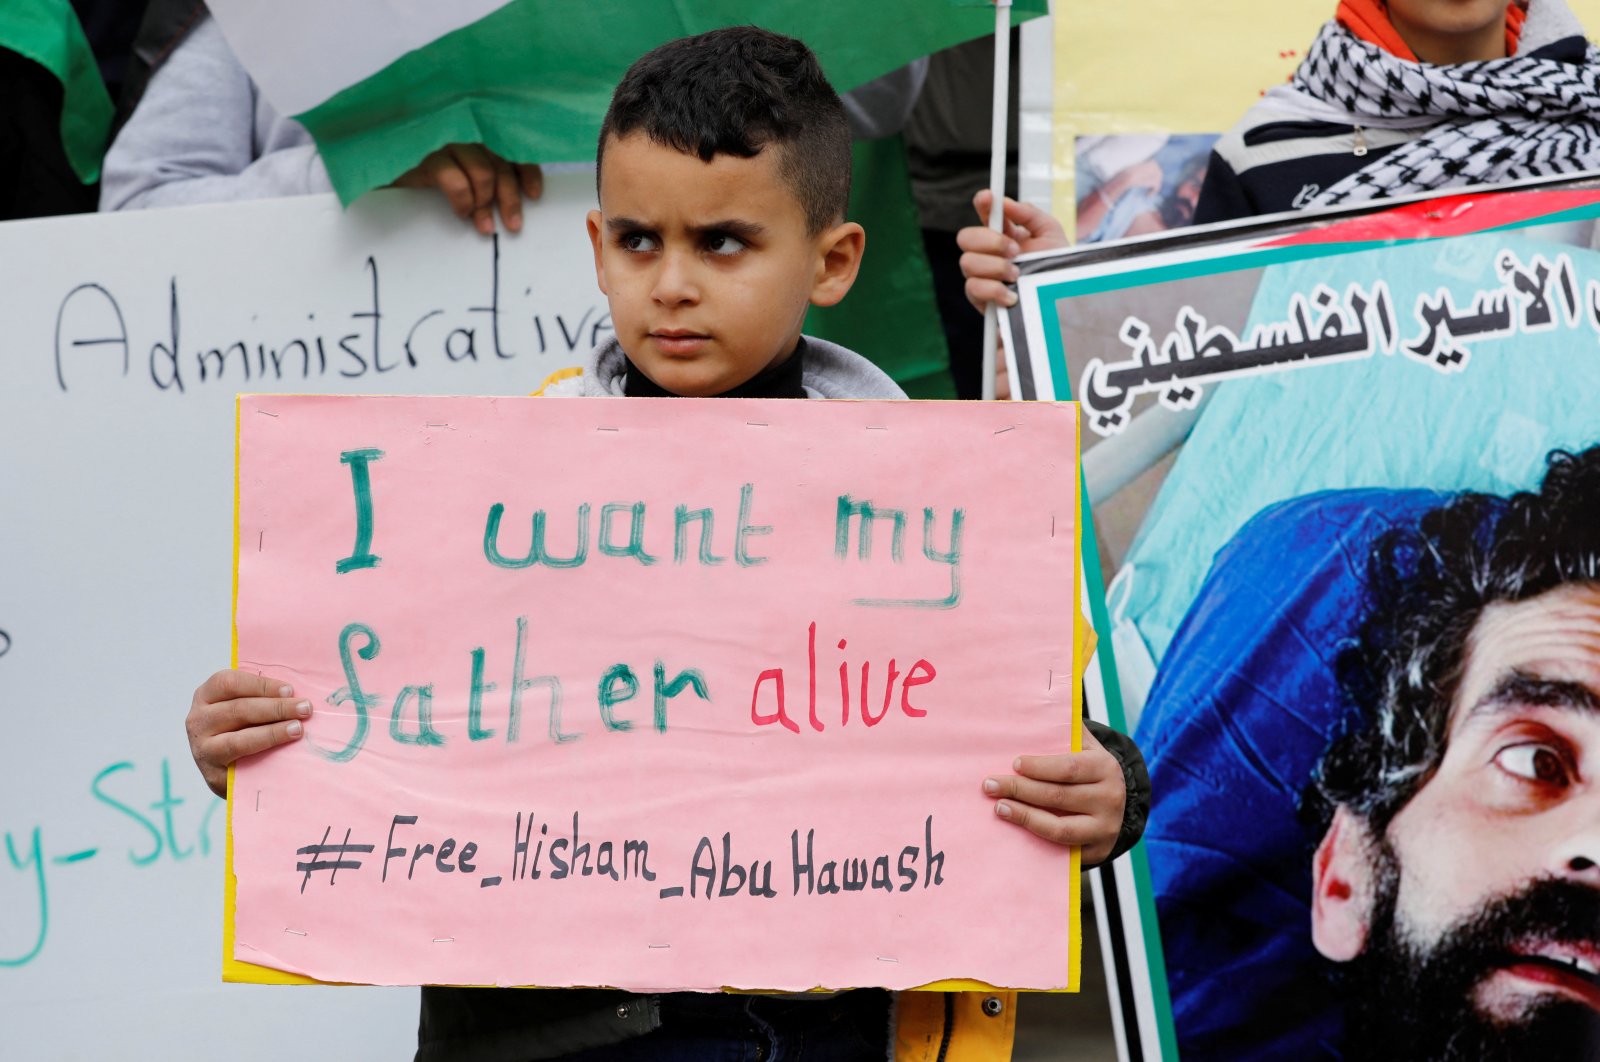 Izz, son of the hunger-striking Palestinian prisoner Hisham Aby Hawash held by Israel, holds a sign during a protest in solidarity with him in Dura, in the Israeli-occupied West Bank, Jan. 2, 2022. (REUTERS)